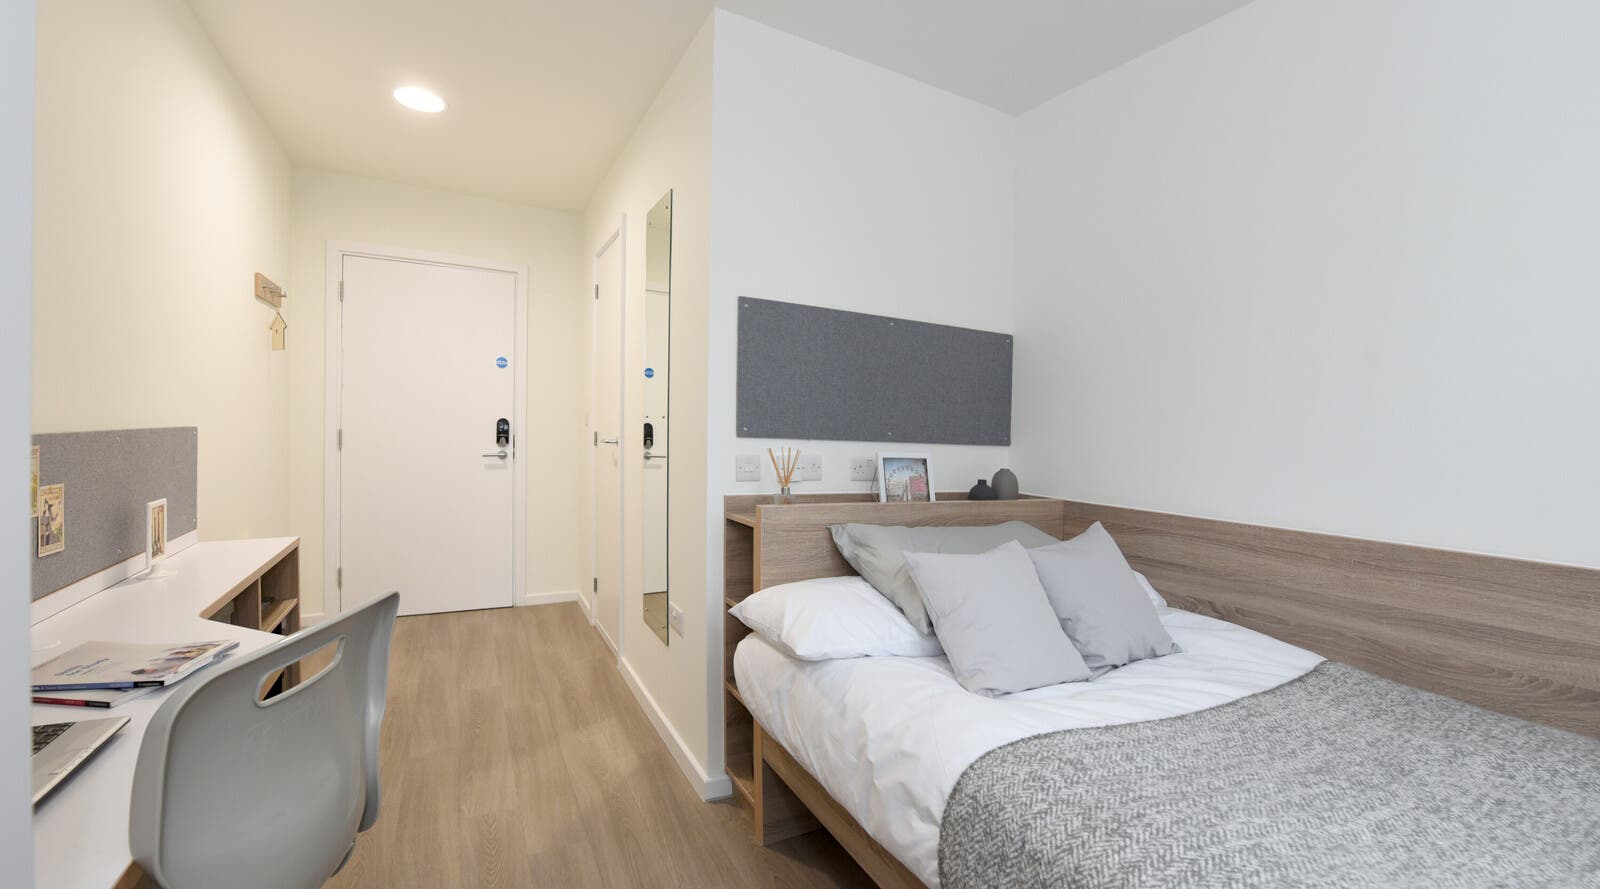 Strathclyde student accommodation bedroom at St. Mungo's